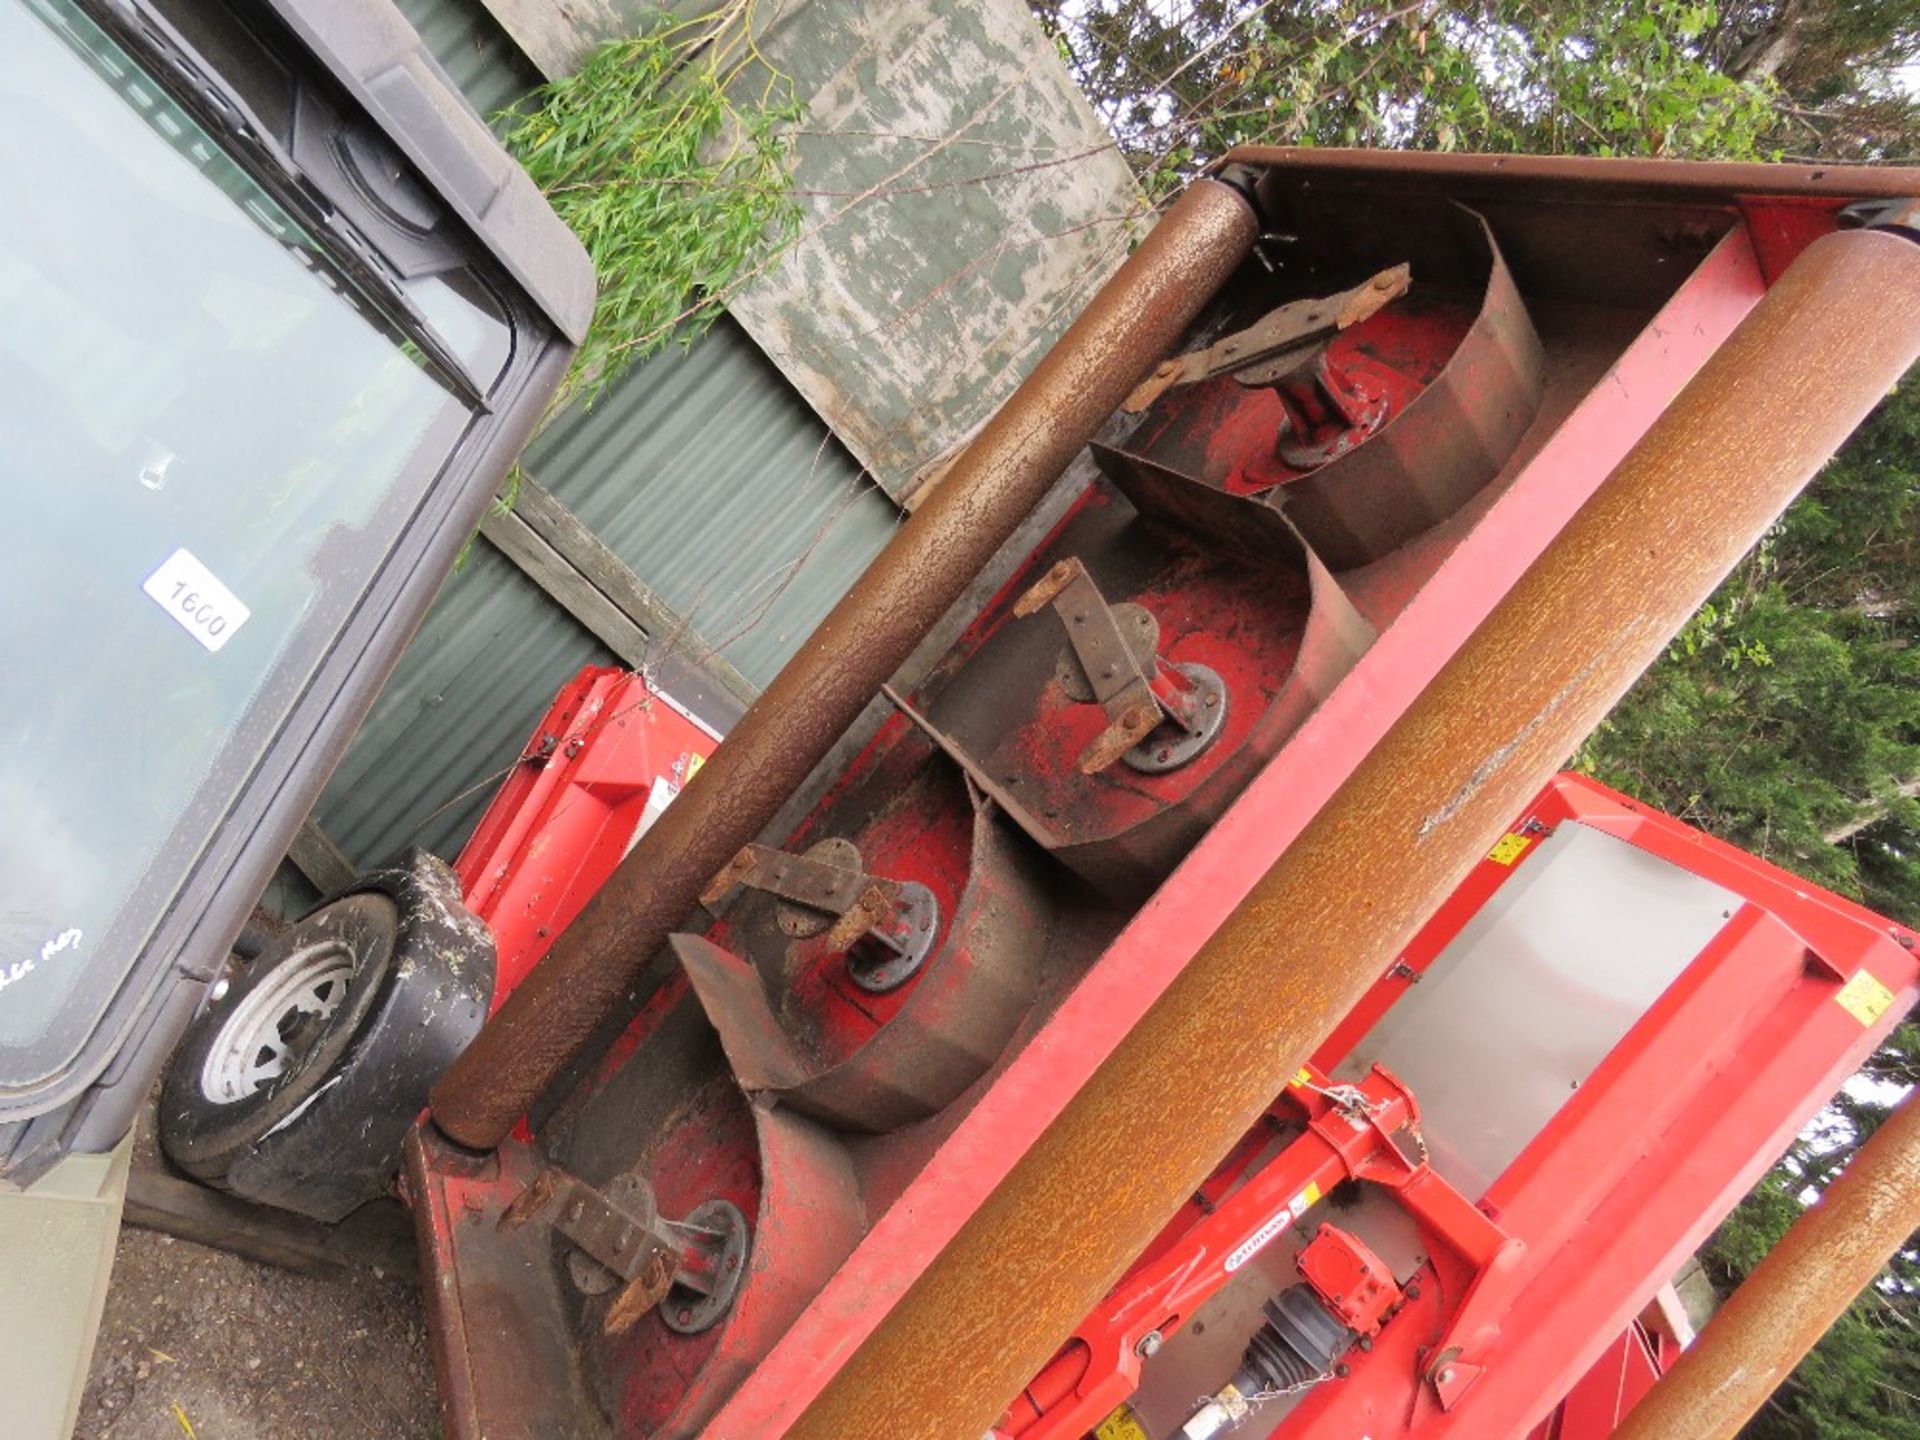 TRIMAX 728-610-400 BATWING TYPE ROLLER MOWER, YEAR 2017. PEGASUS S3 HEADS. NB: REQUIRES SOME REPAIR - Image 3 of 11